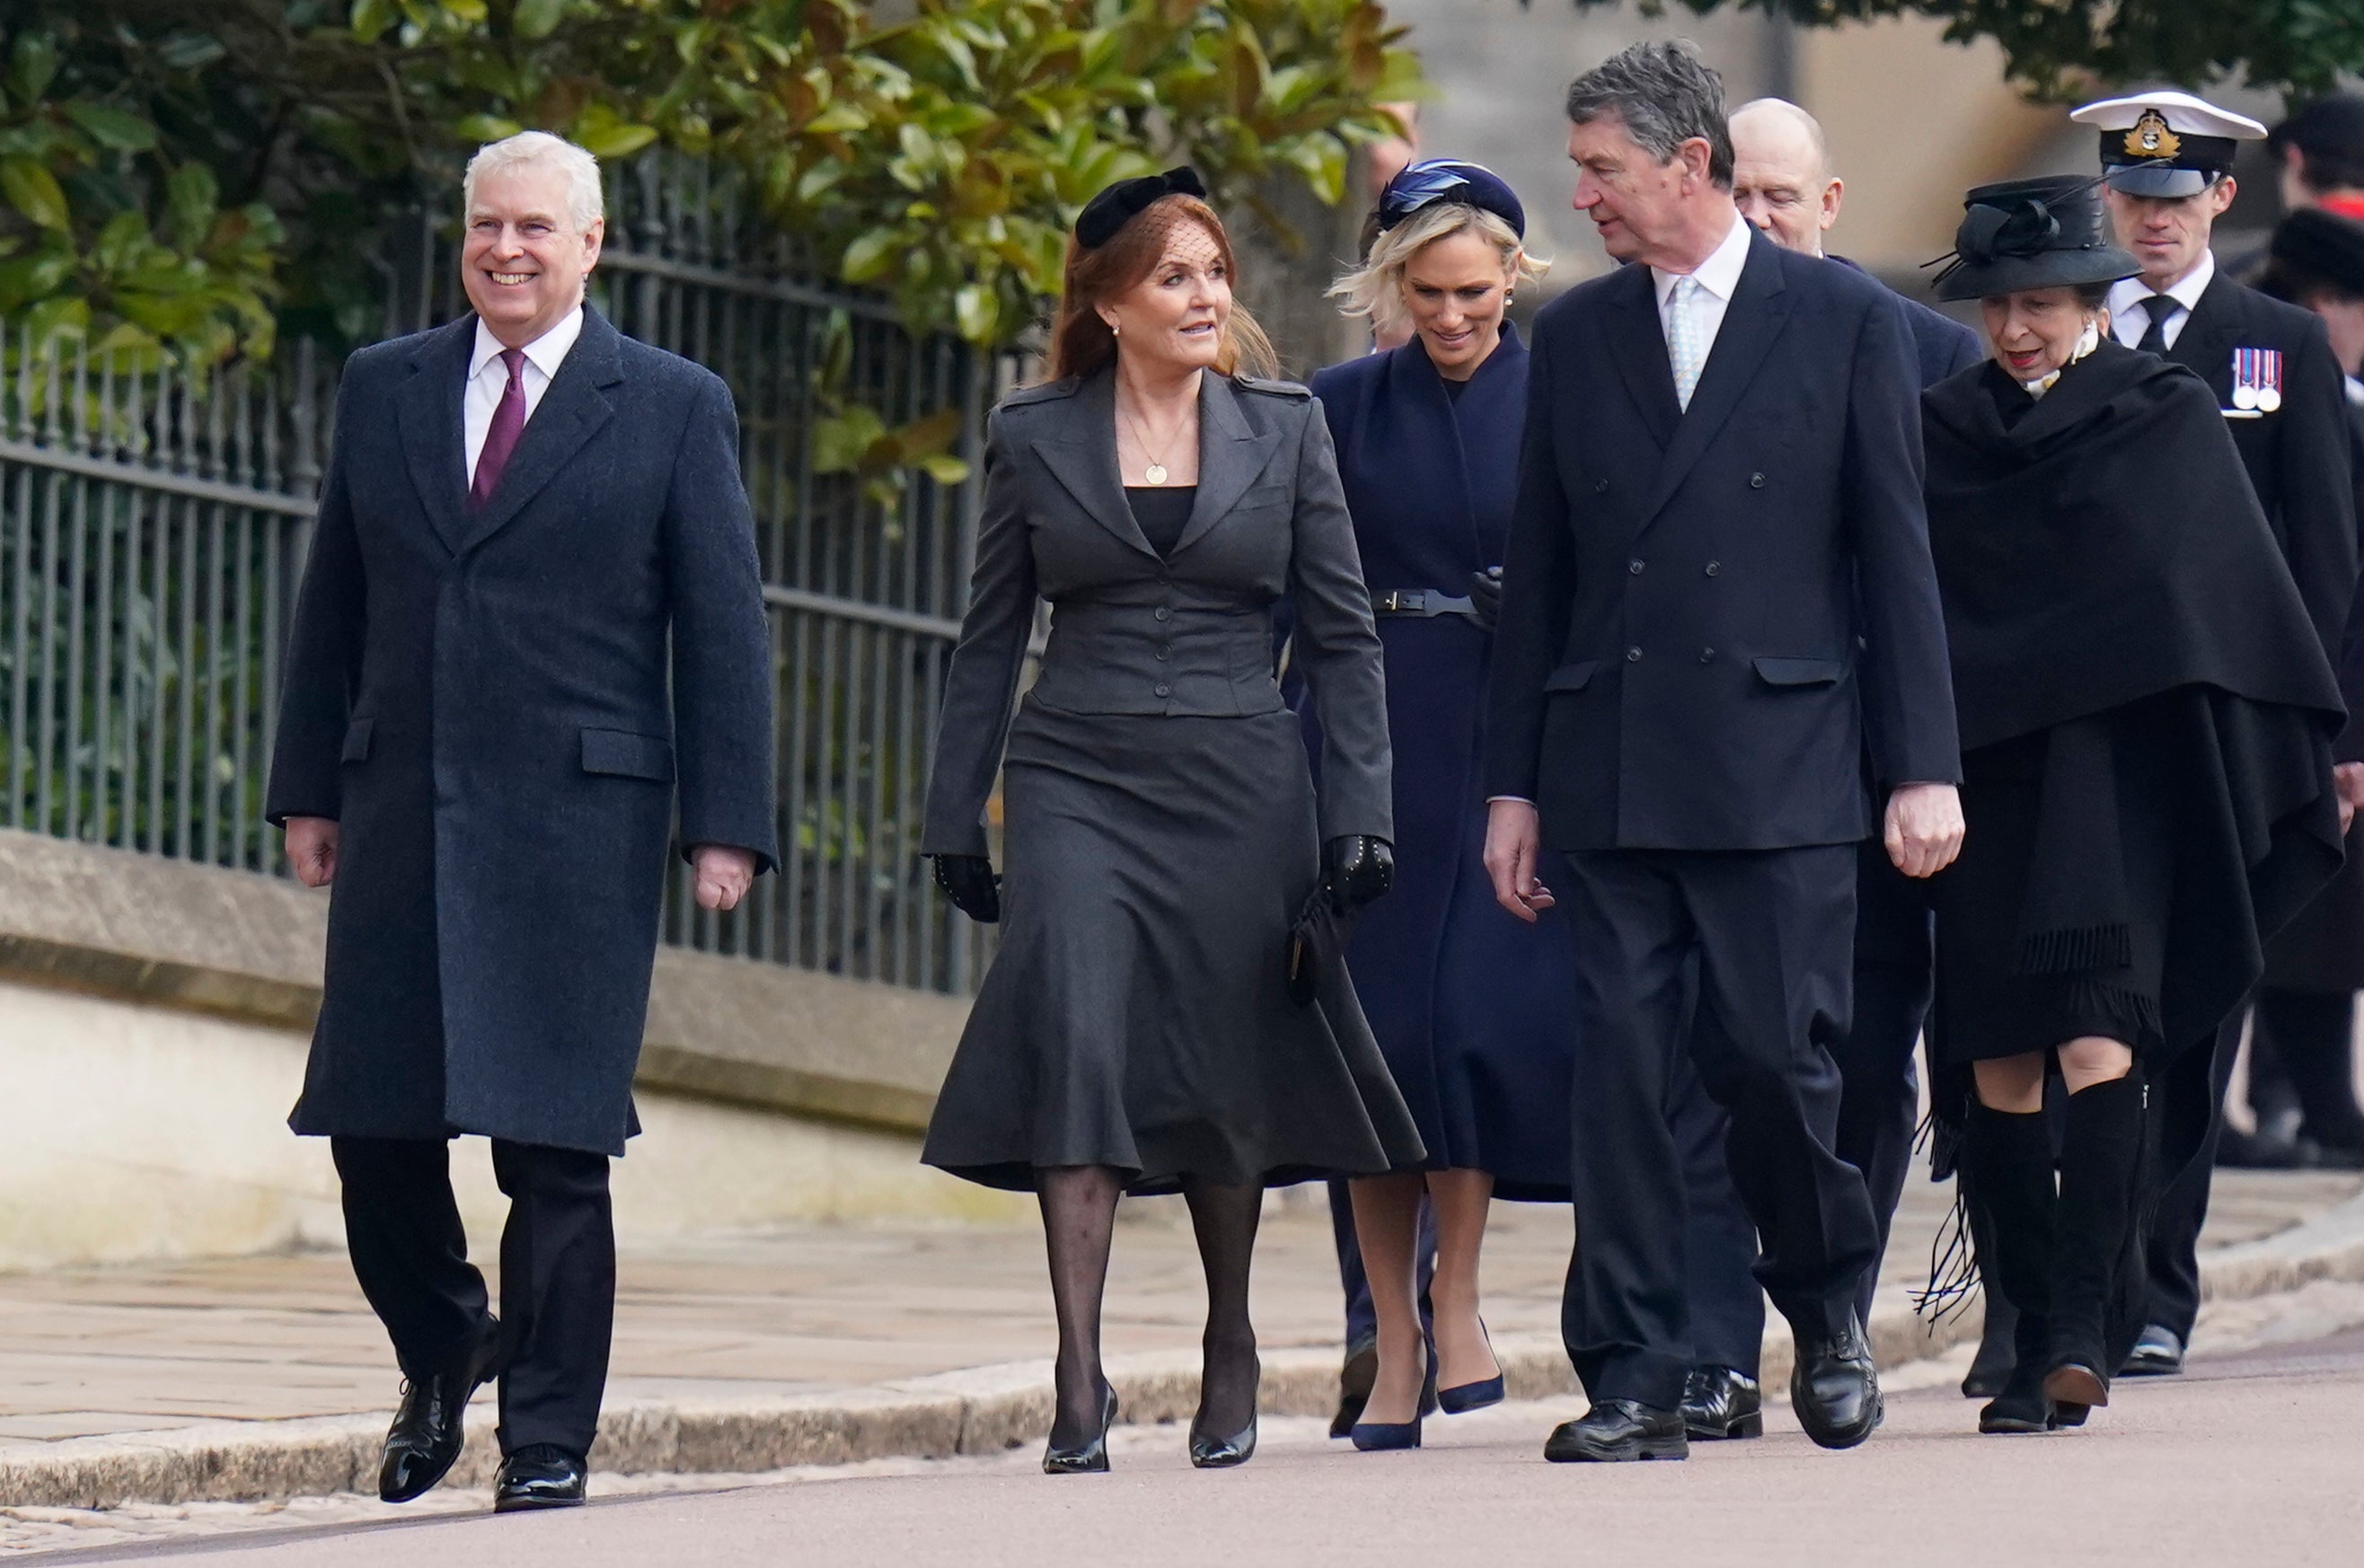 Prince Andrew (left) leads the line alongside Sarah, Duchess of York Duchess of York, Zara Tindall, Sir Timothy Laurence, Mike Tindall and Anne, Princess Royal at a meorial service for the late King Constantine of Greece